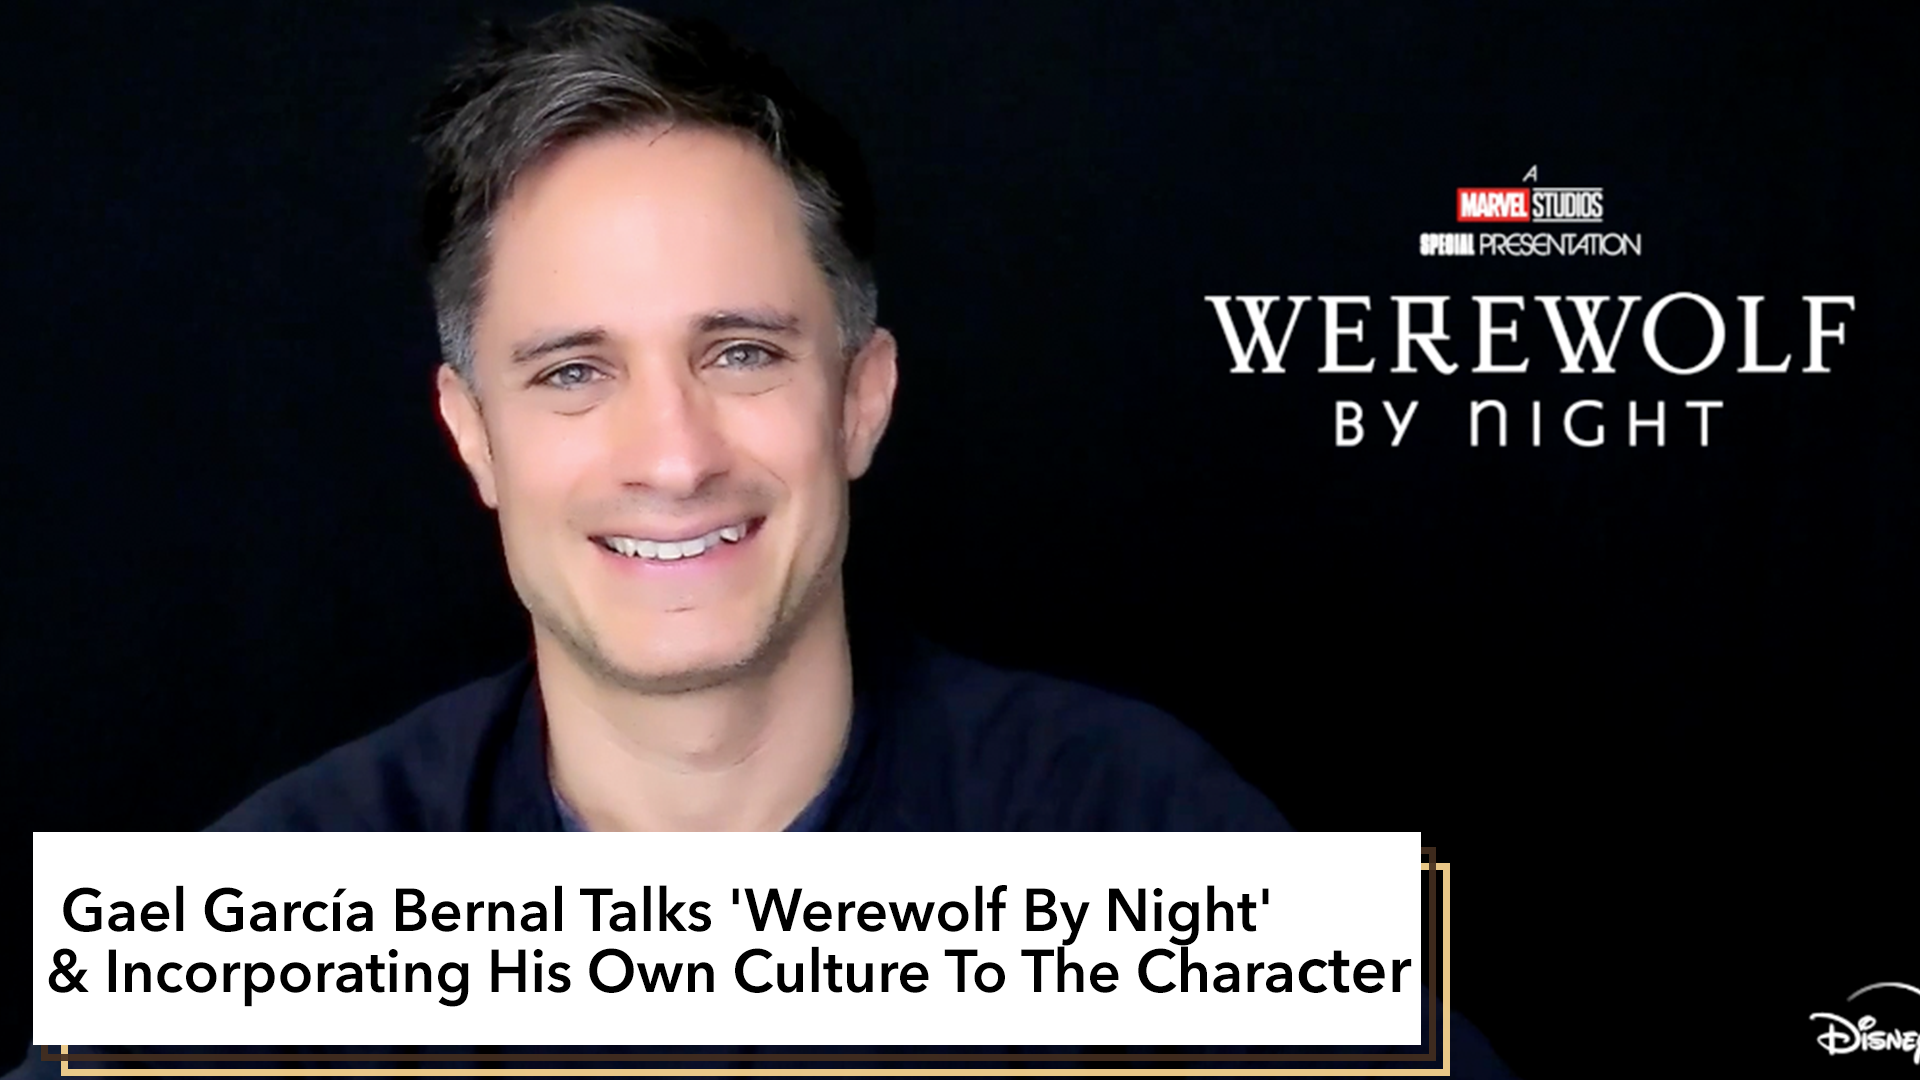 Interview: Gael García Bernal Discusses ‘Werewolf By Night’ & Incorporating His Own Culture To The Character